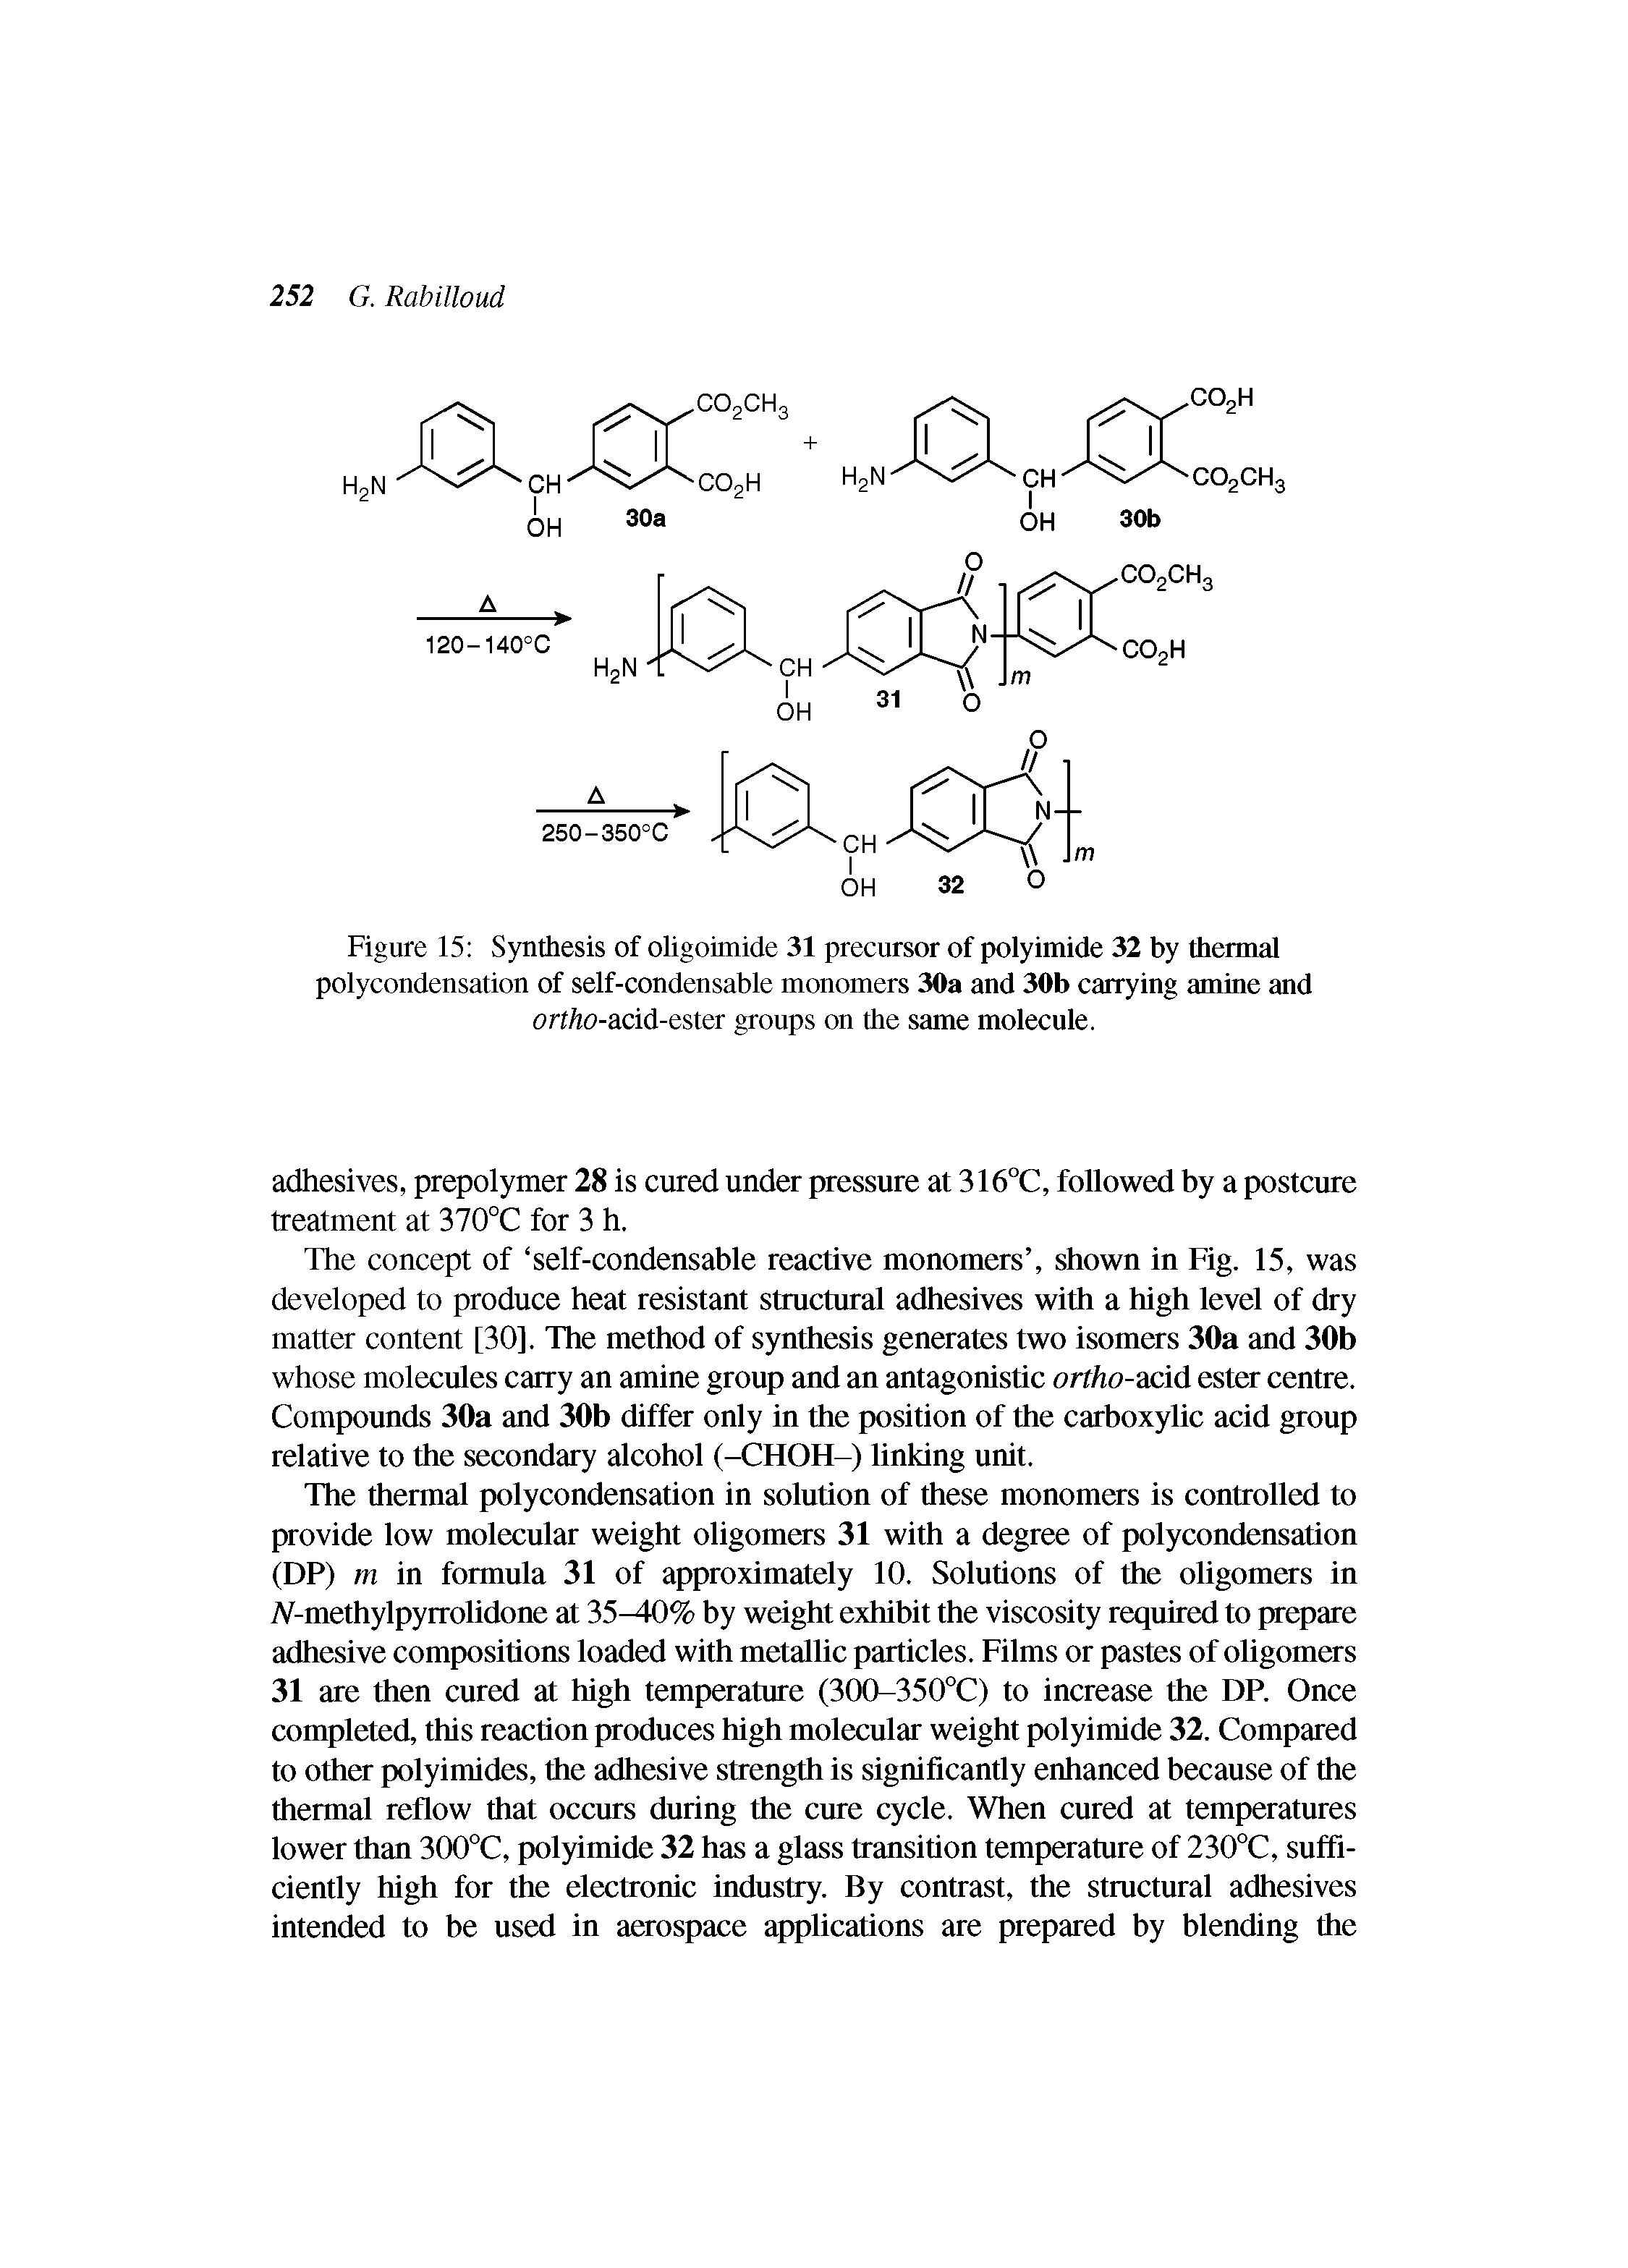 Figure 15 Synthesis of oligoimide 31 precursor of polyimide 32 by thermal polycondensation of self-condensable monomers 30a and 30b carrying amine and ort/to-acid-ester groups on the same molecule.